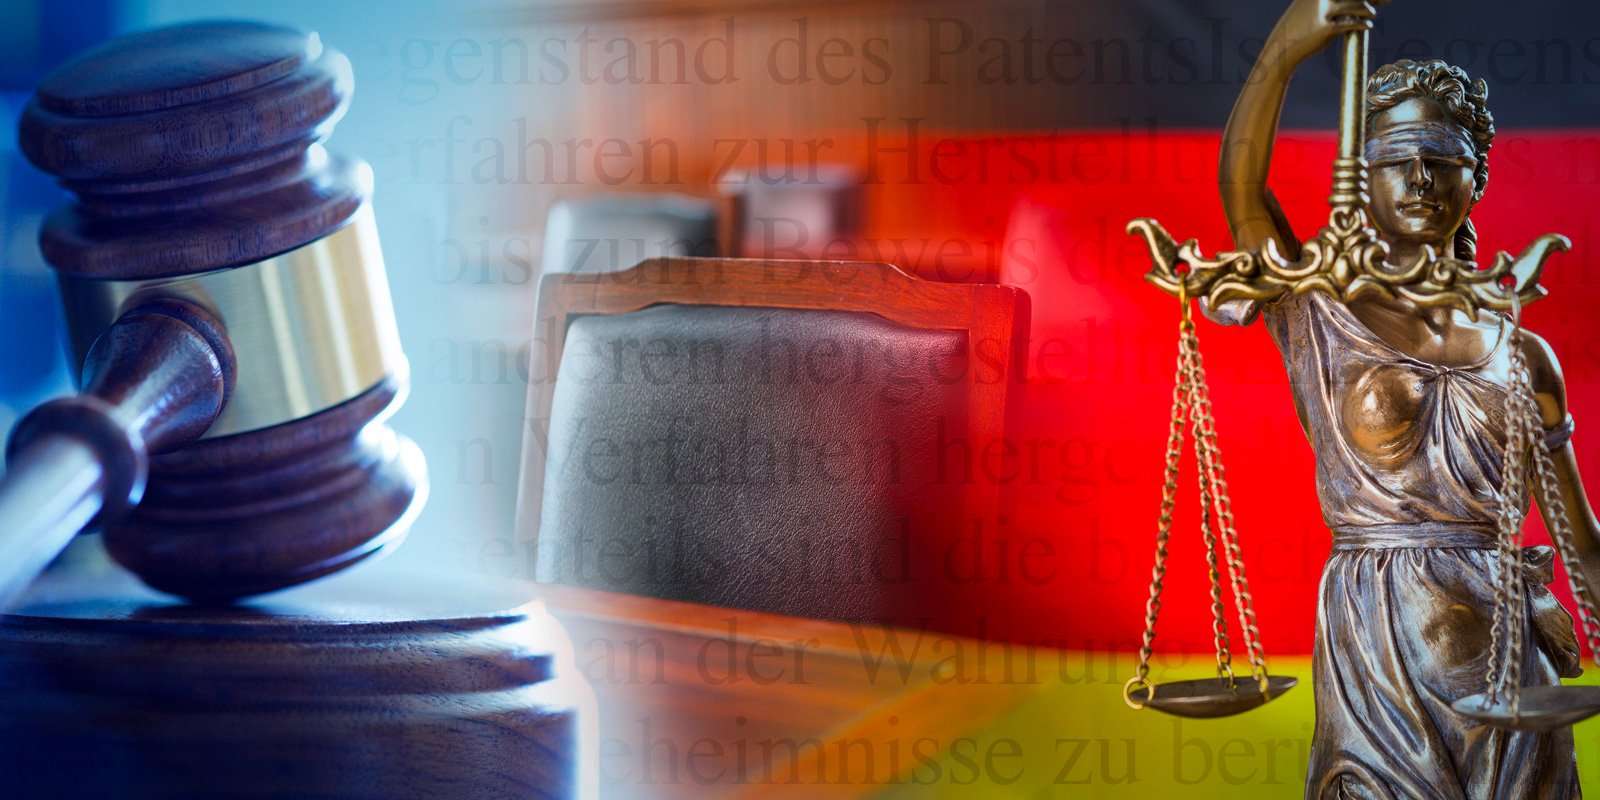 Still Alive The German Automatic Injunction in Patent Infringement Cases